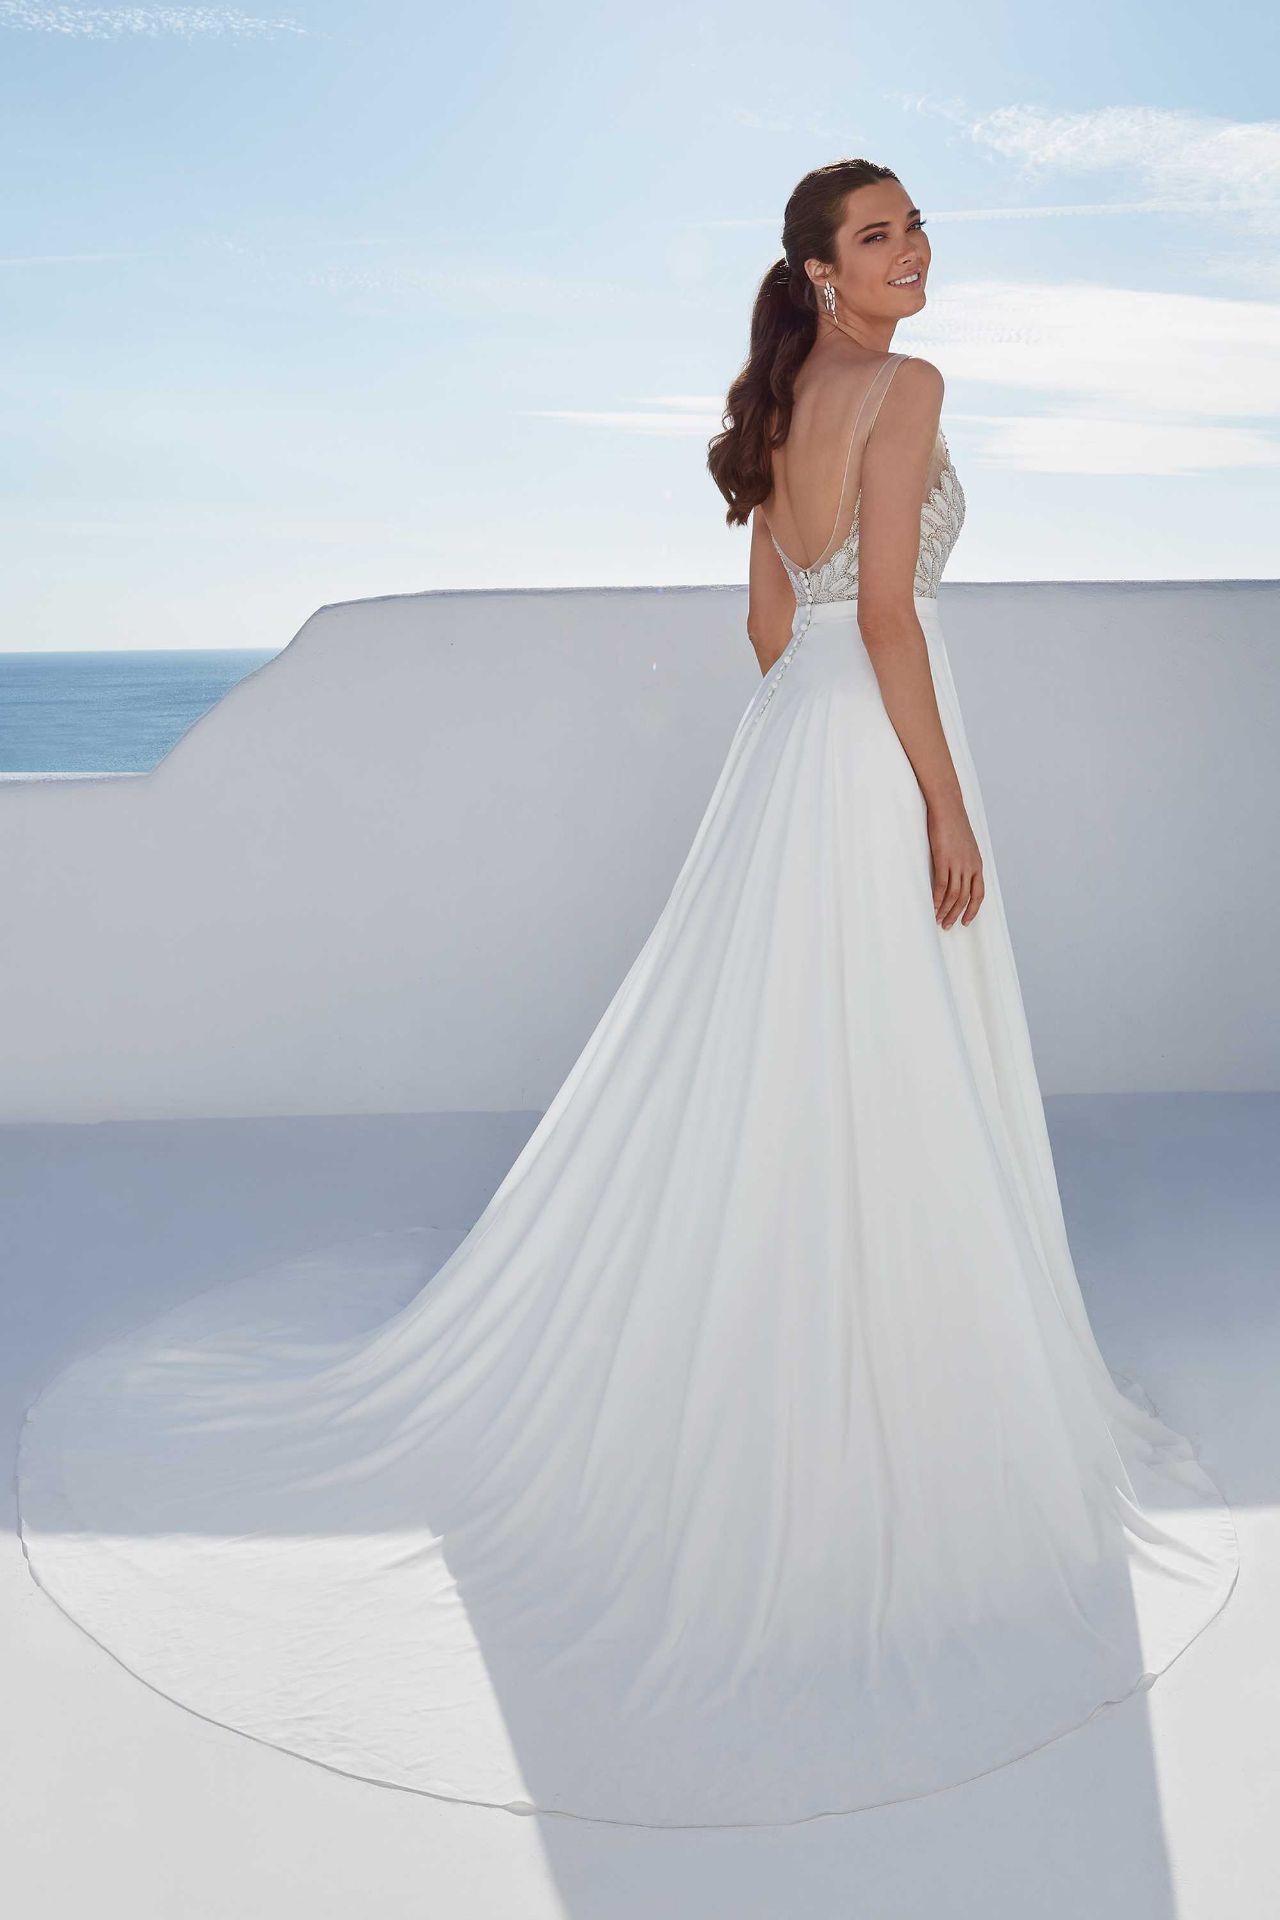 1 x Justin Alexander Wedding Dress With A Beaded Illusion V-Neckline Bodice - Size 12 - RRP £1,725 - Image 6 of 9